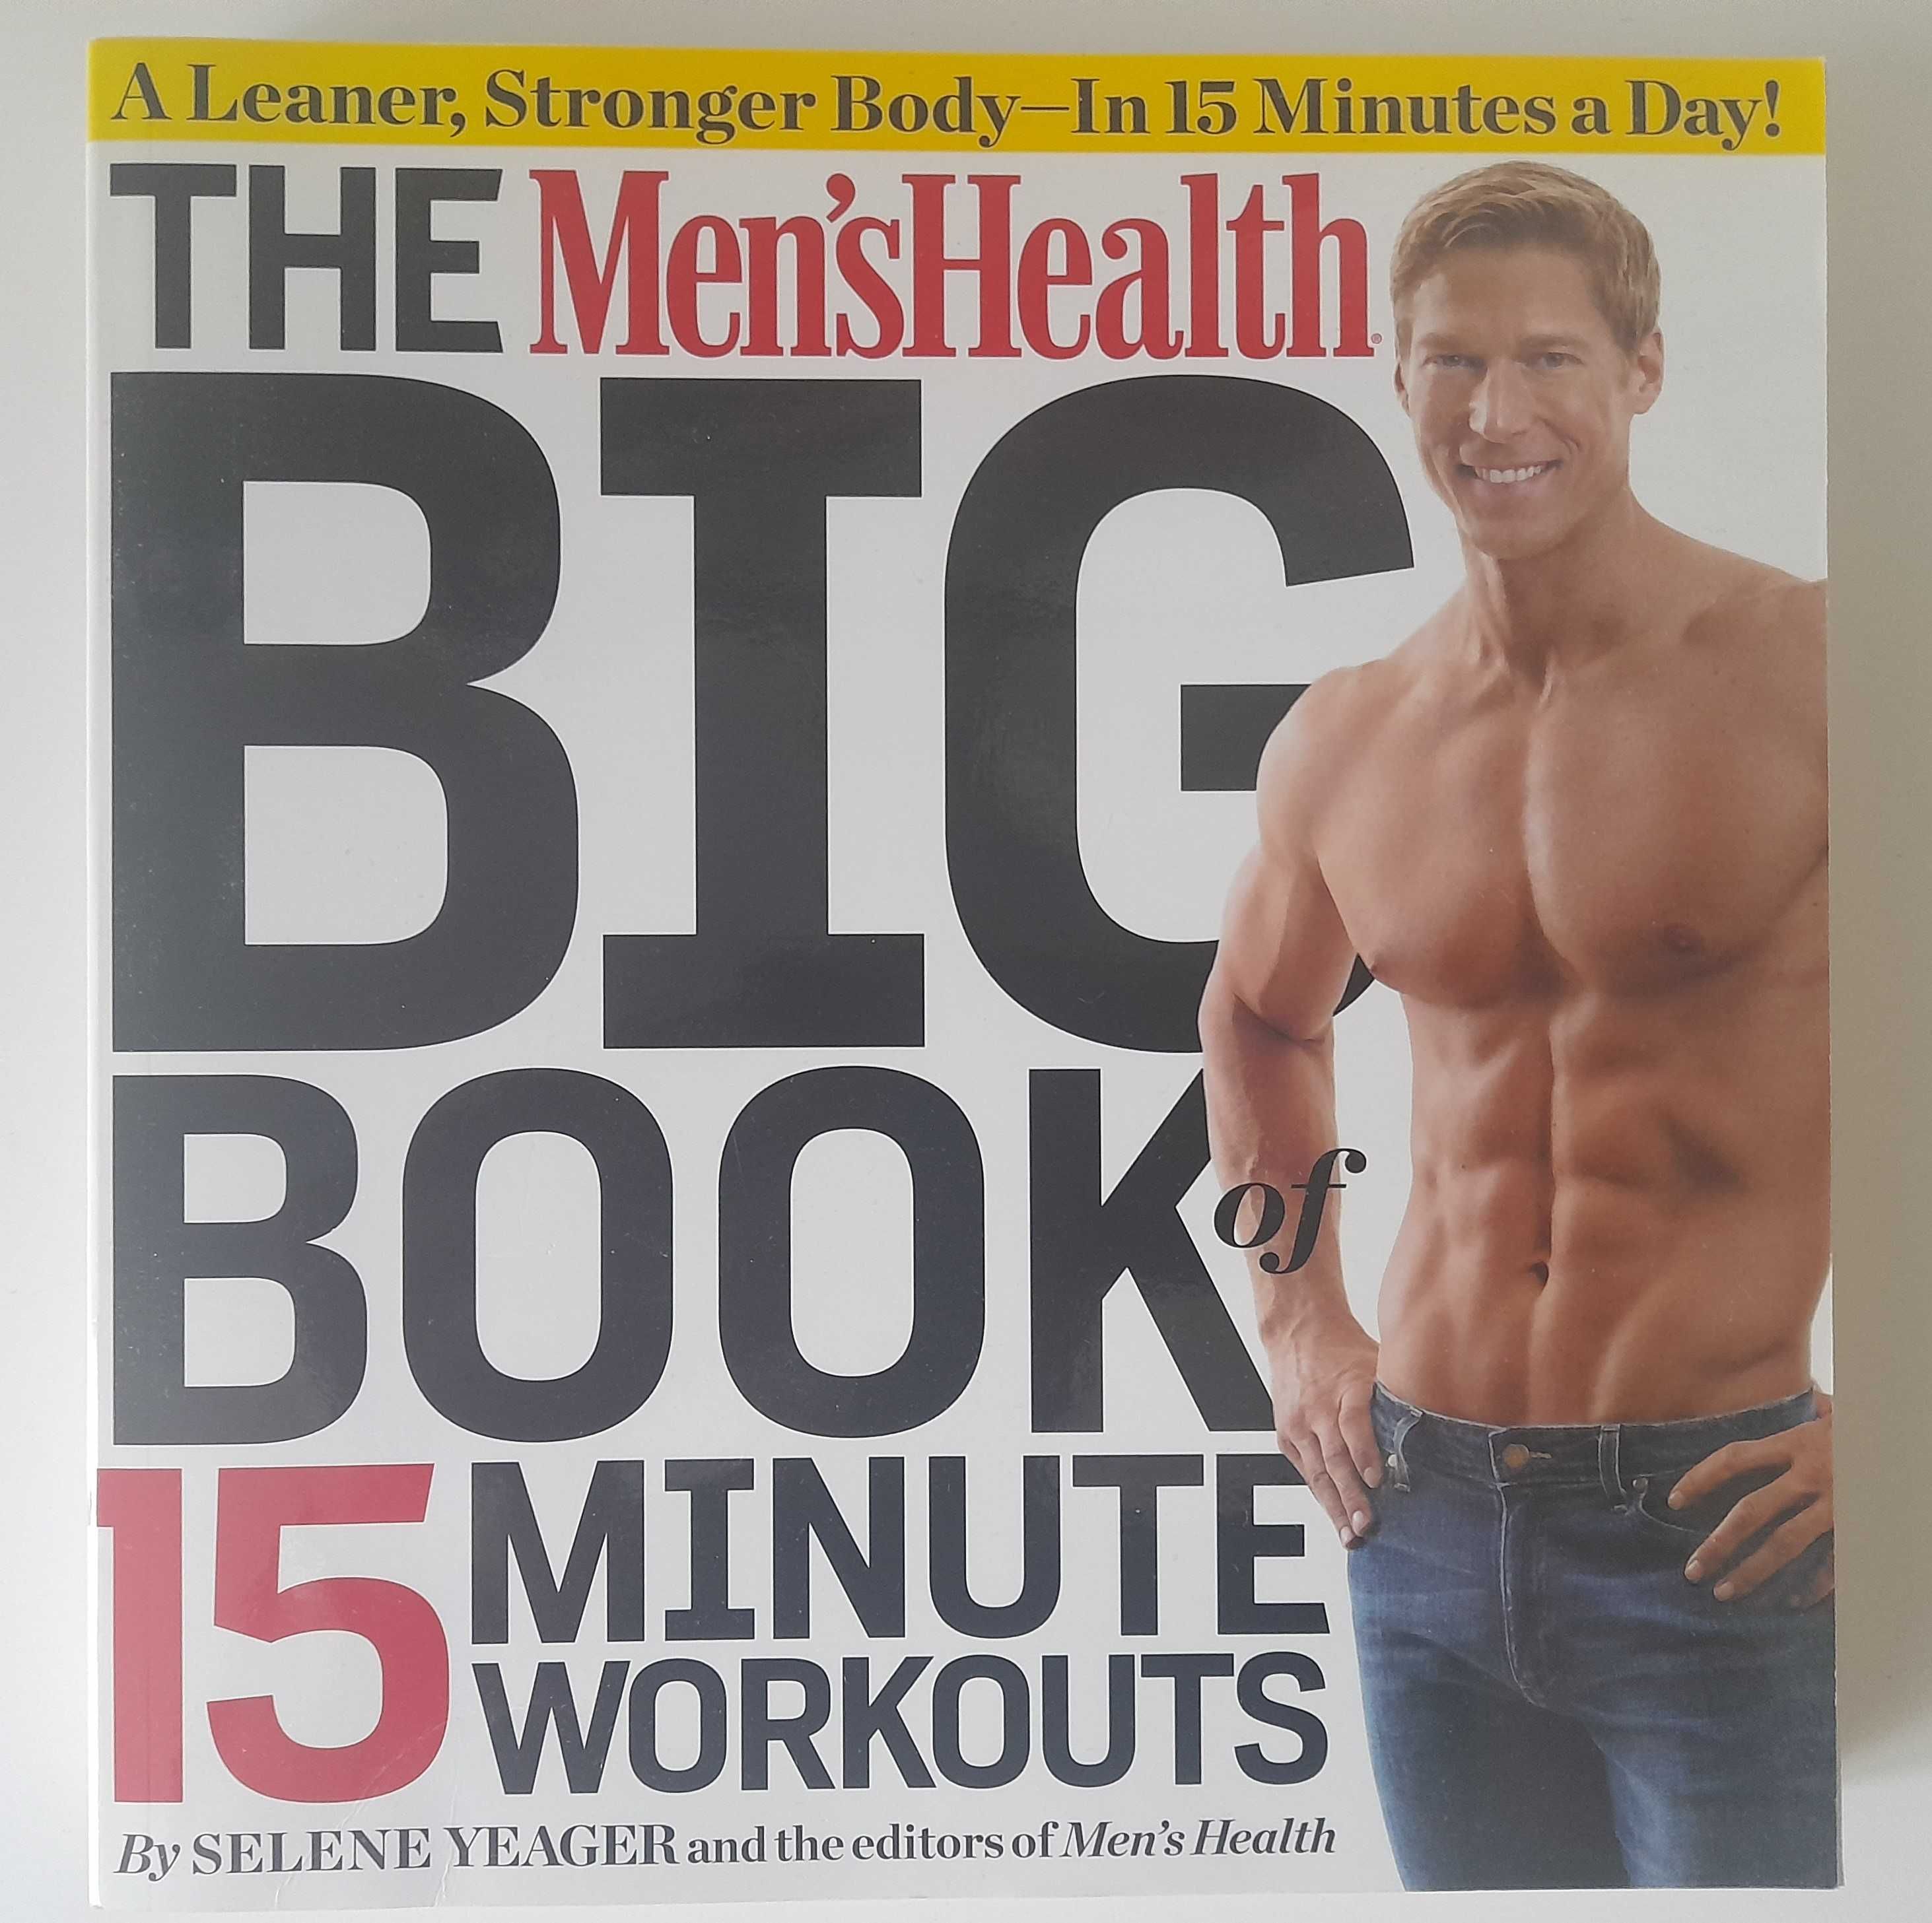 The Men's Health Big Book of 15 Minute Workouts Selene Yeager